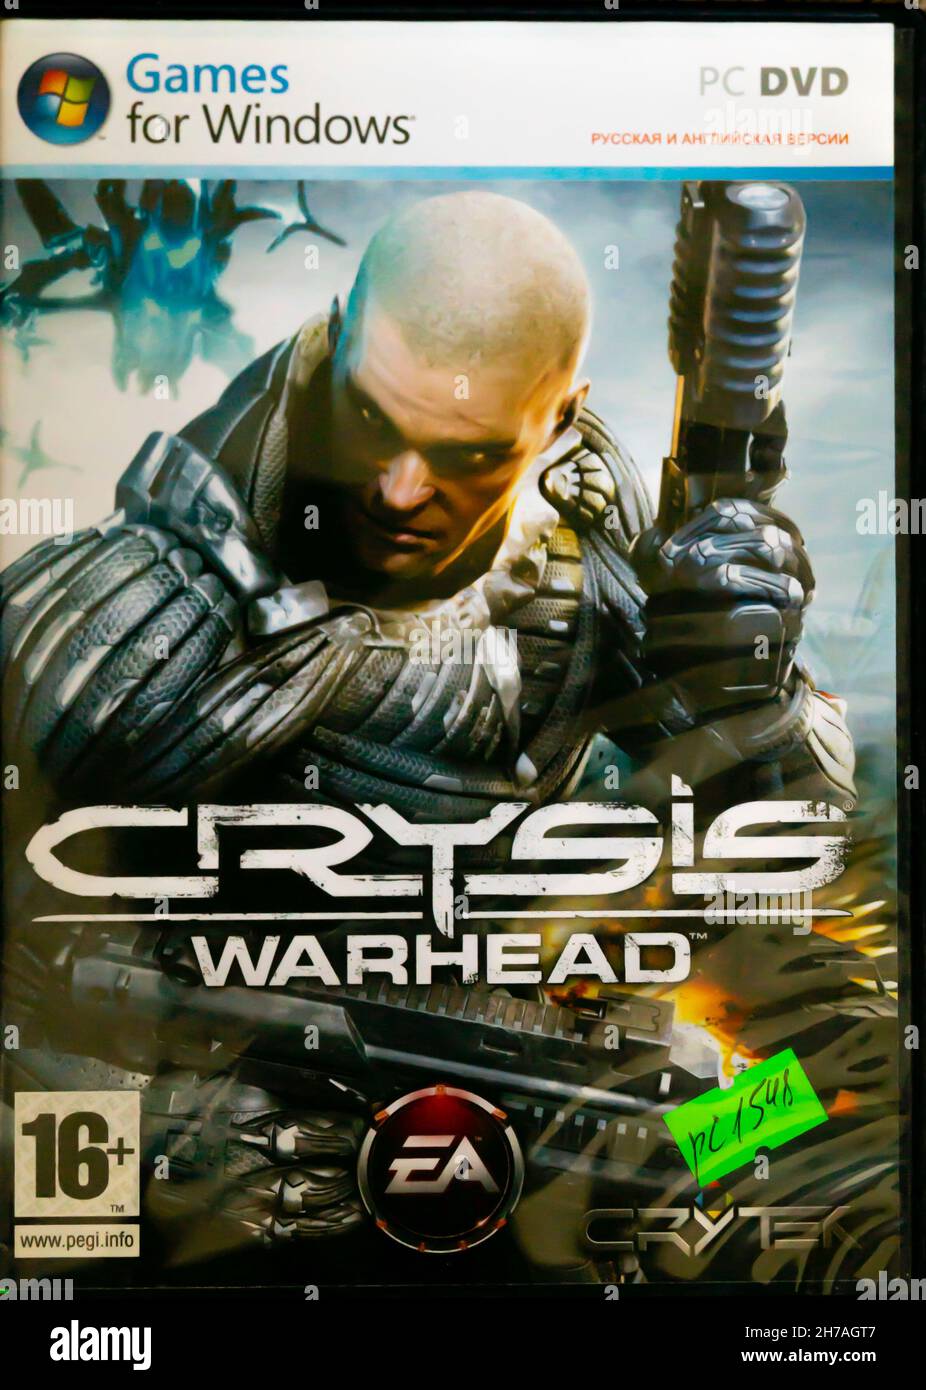 Video Game, shooter, for Windows PC DVDs cover from 2000s: Crysis Warhead  developed by Crytek, released in 2008 Stock Photo - Alamy